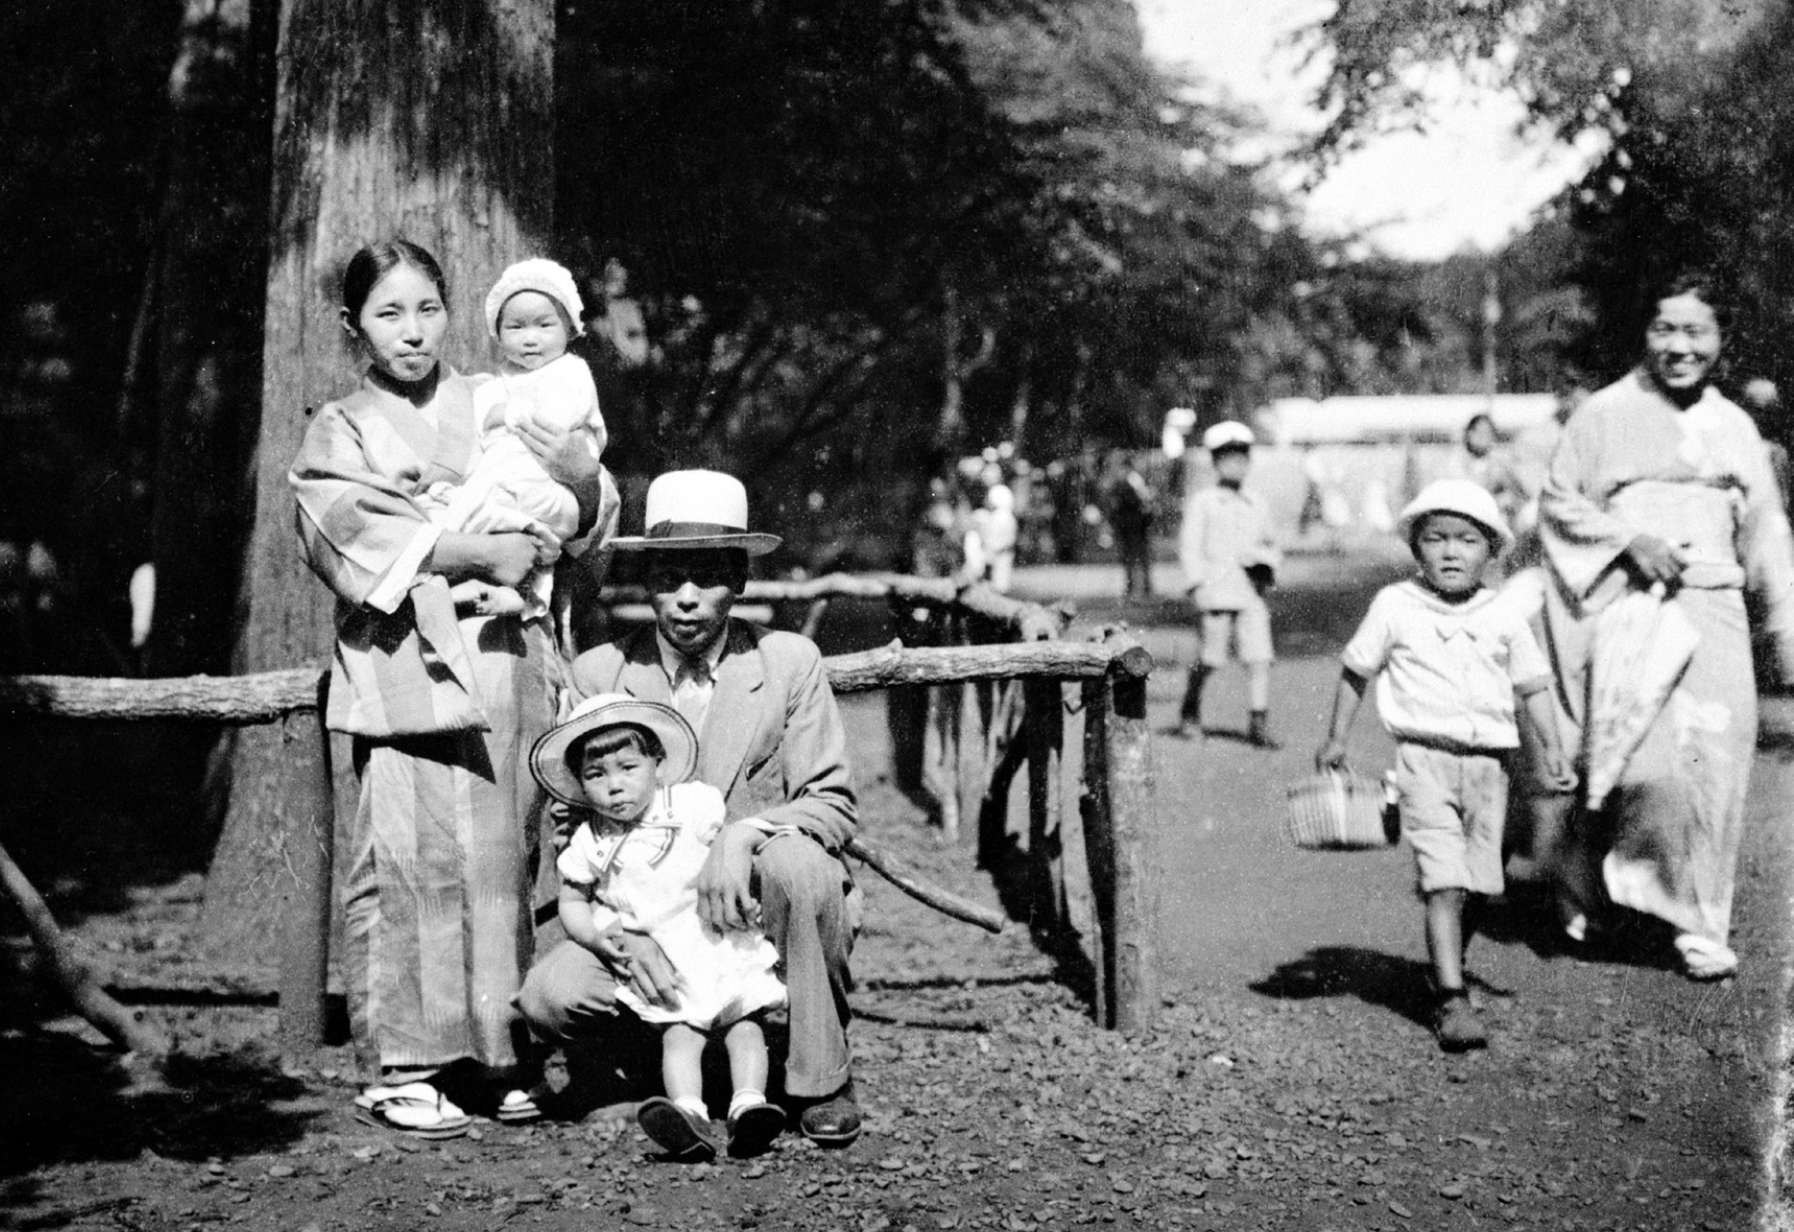 Tomoji in kimono stands in front of a tree in the park holding an infant as Shinjo in a wide brimmed hat kneels next to her with a toddler; smiling families walk nearby.